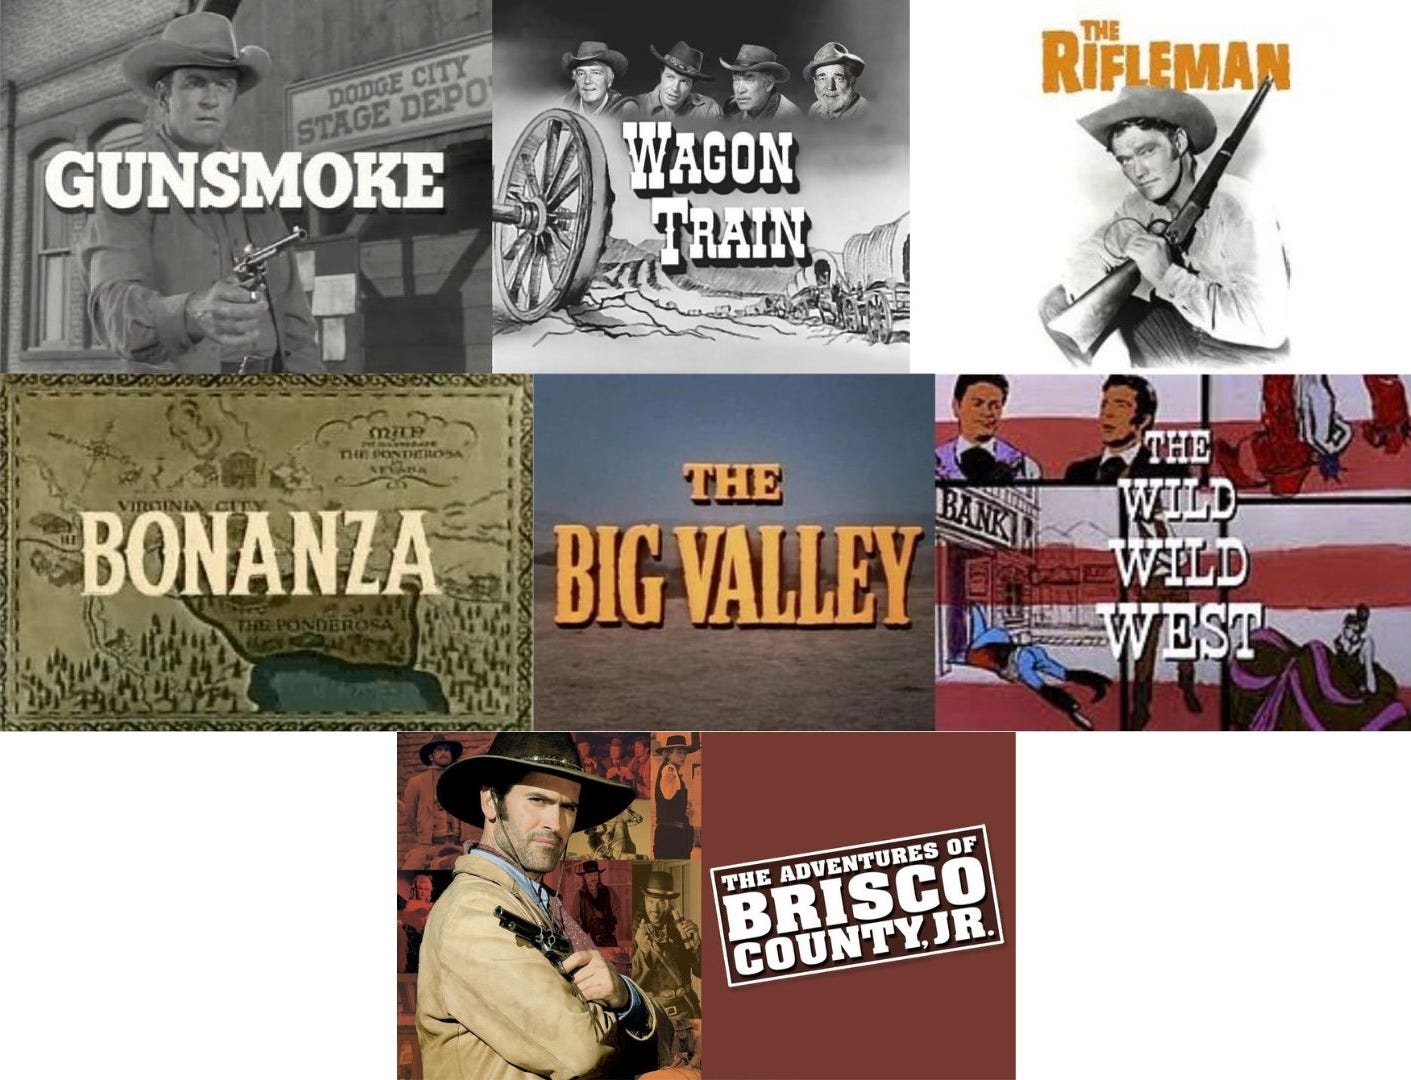 This collage shows the title cards of 7 American television Westerns. Top Row (left to right): Gunsmoke (1955-1975), Wagon Train (1957-1965), & The Rifleman (1958-1963); Middle Row (left to right): Bonanza (1959-1973), The Big Valley (1965-1969), & The Wild Wild West (1965-1969); Bottom Row: The Adventures of Brisco County, Jr. (1993)